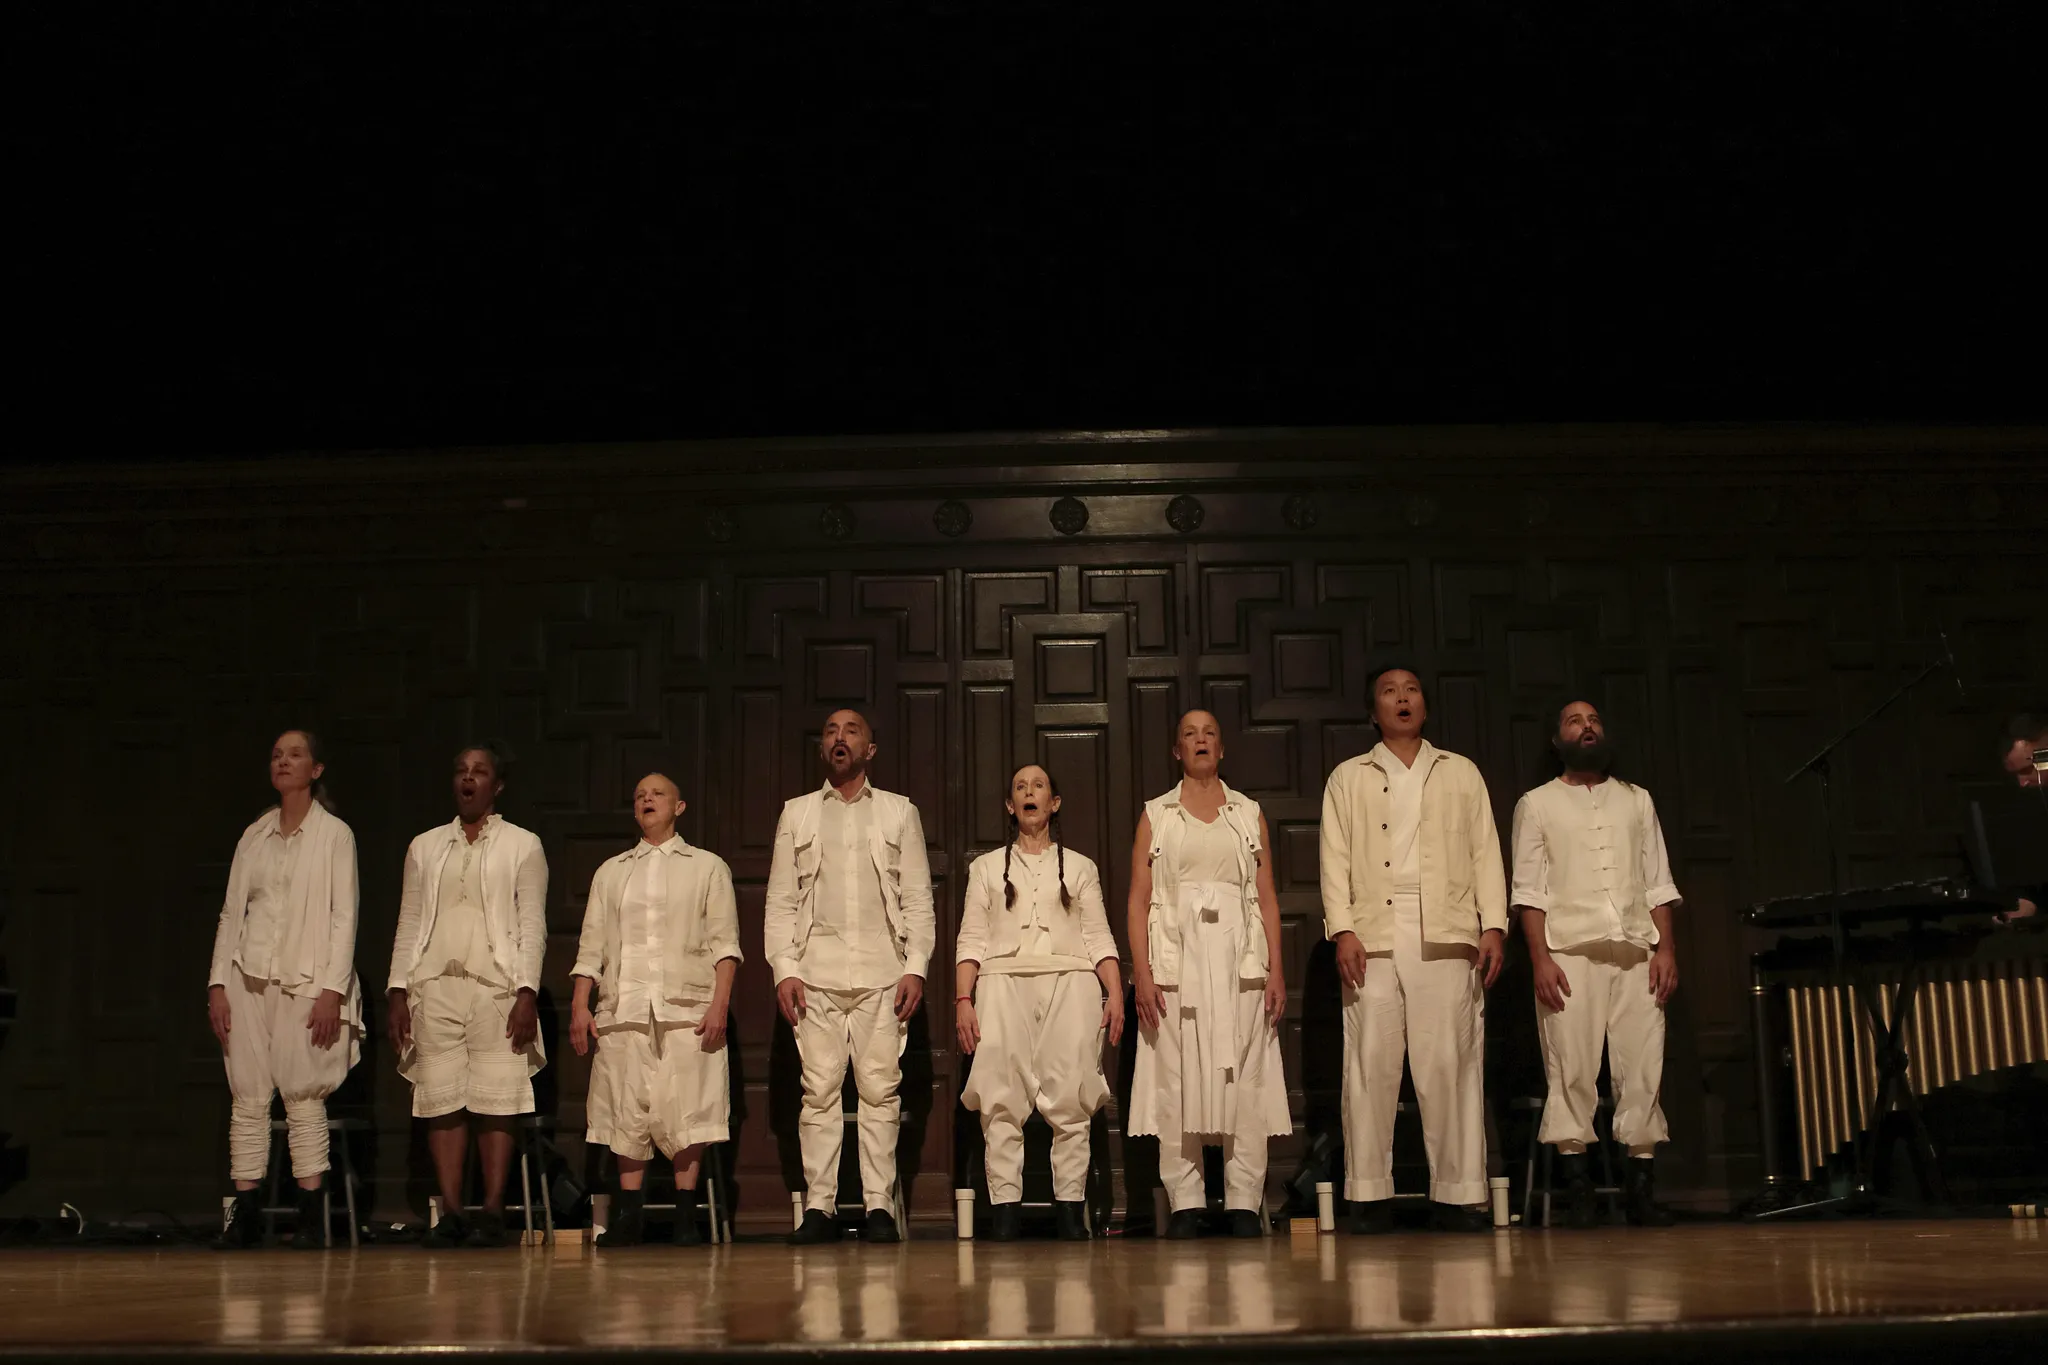 8 individuals of different ages, ethnicities, heights and hairstyles singing dressed in loose white clothes next to someone playing the marimba